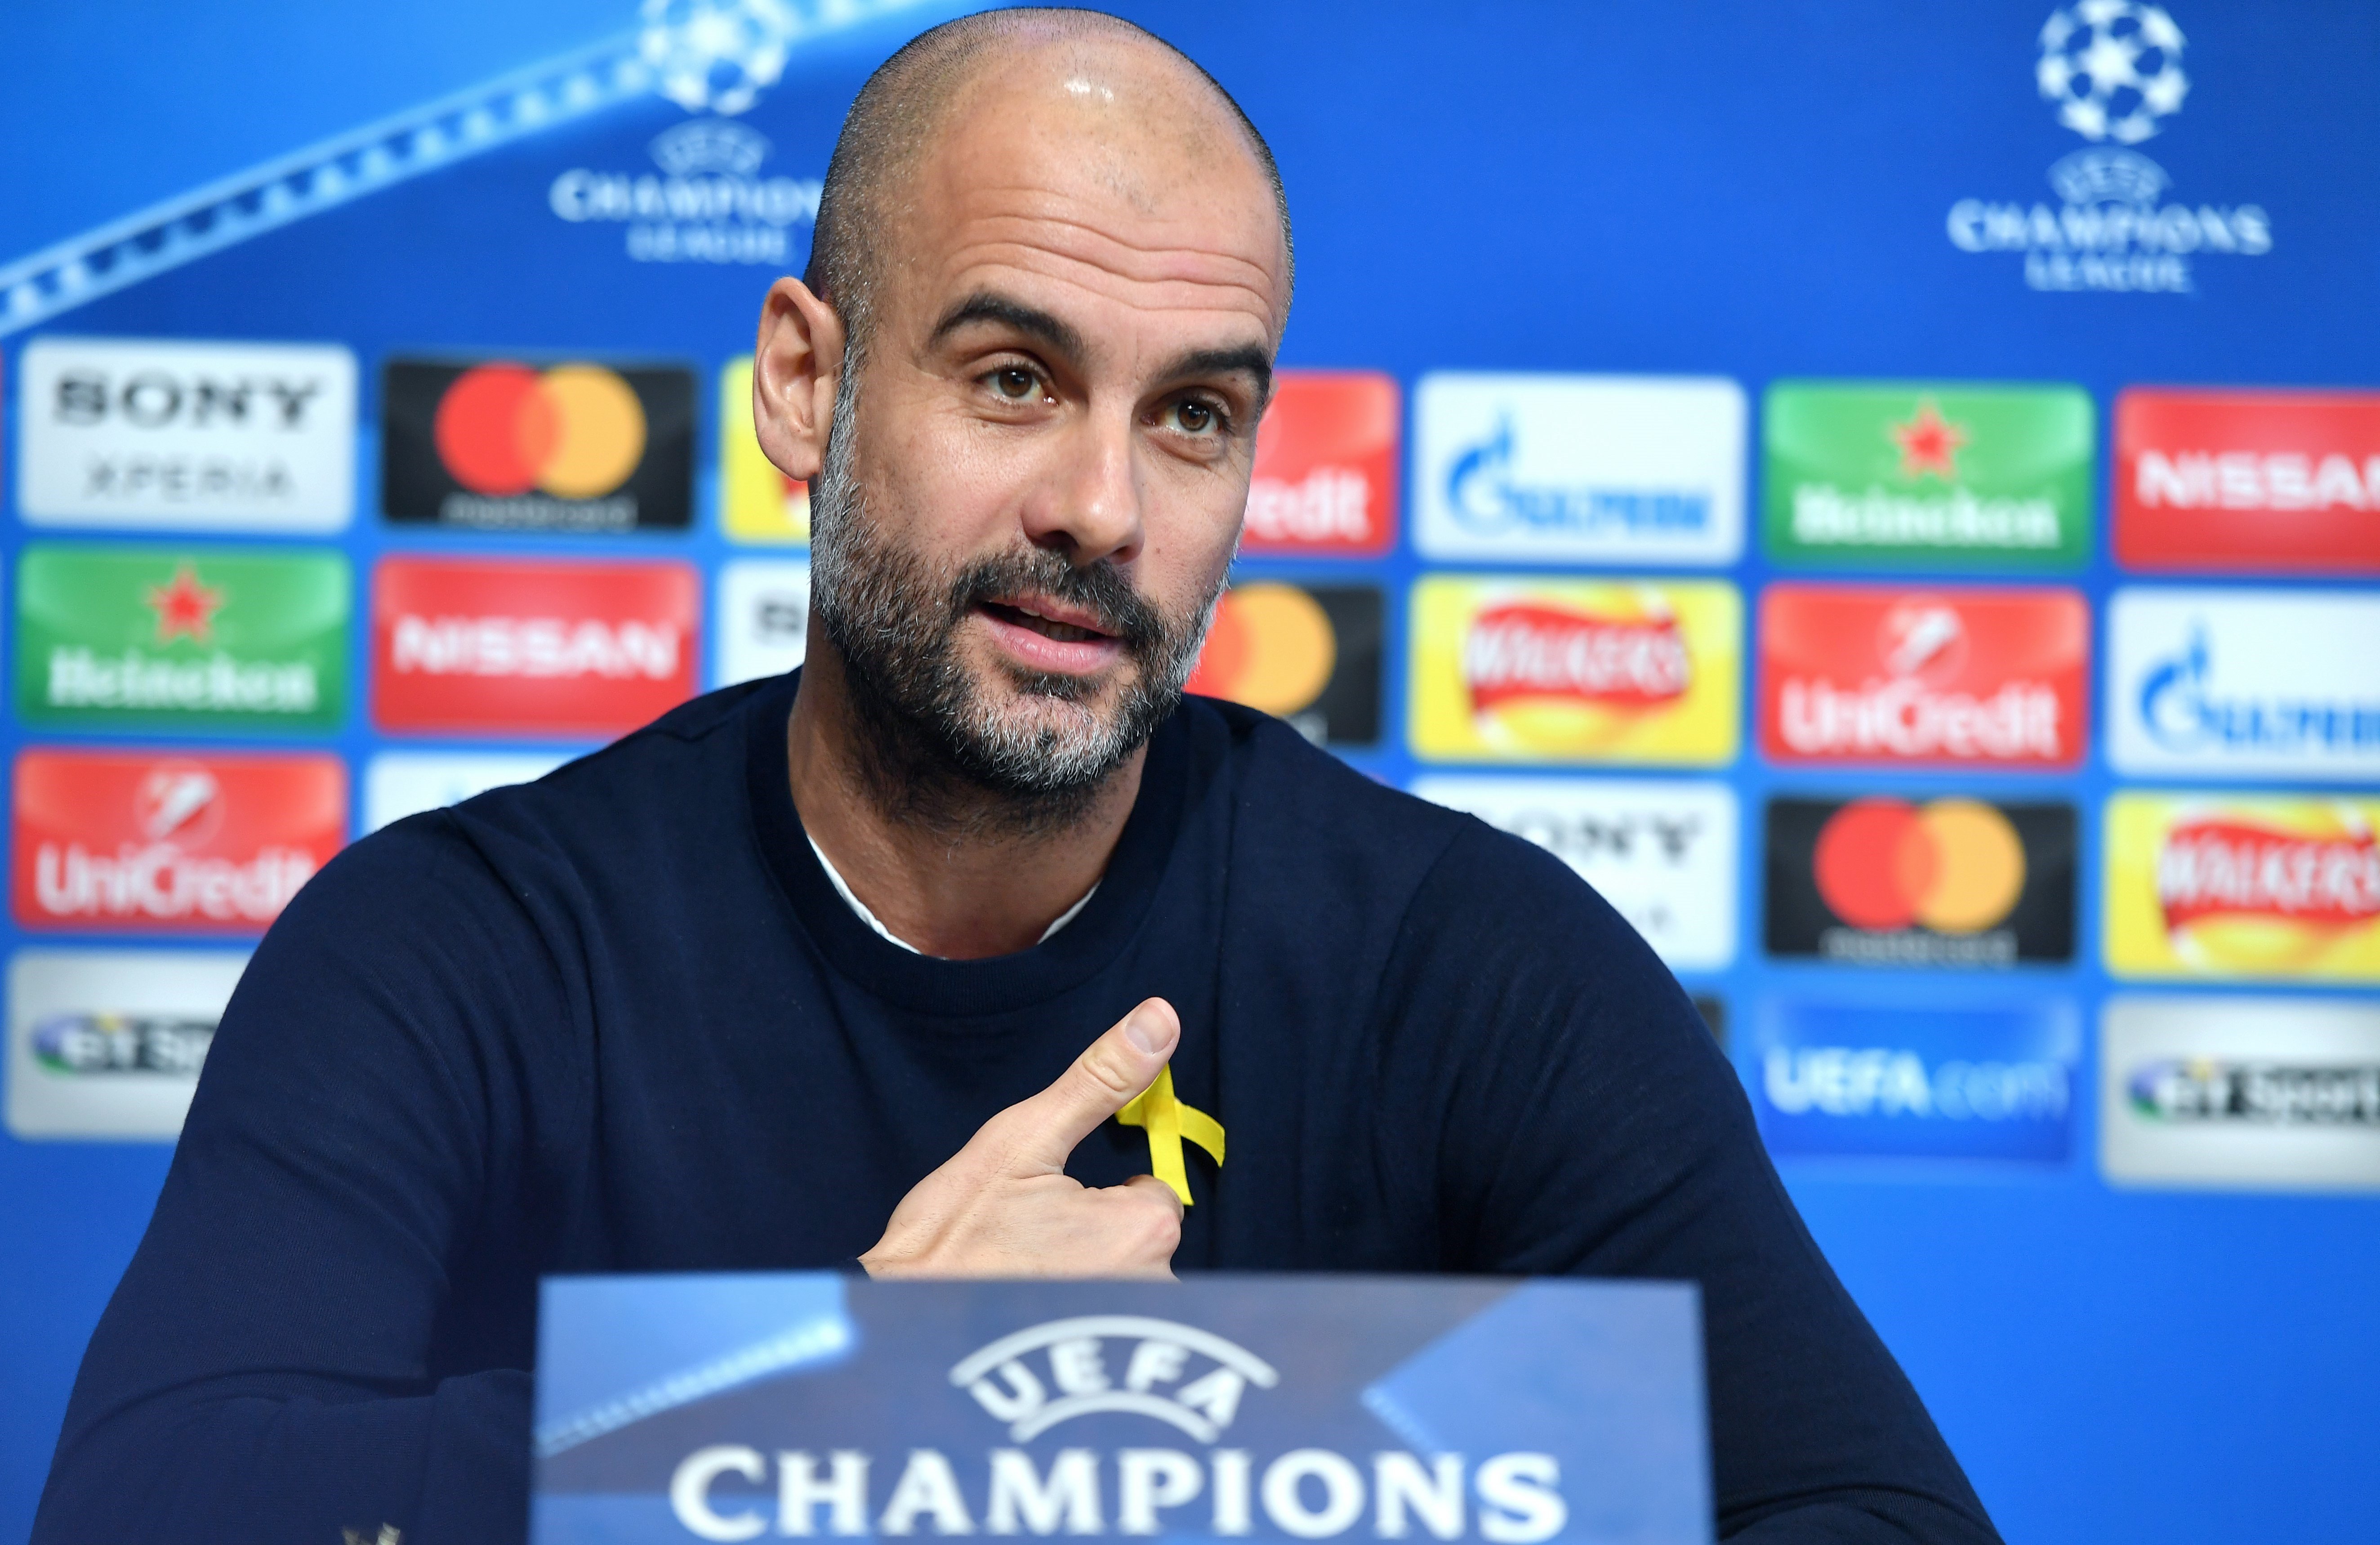 Guardiola, fined 22,500 euros for wearing a yellow ribbon